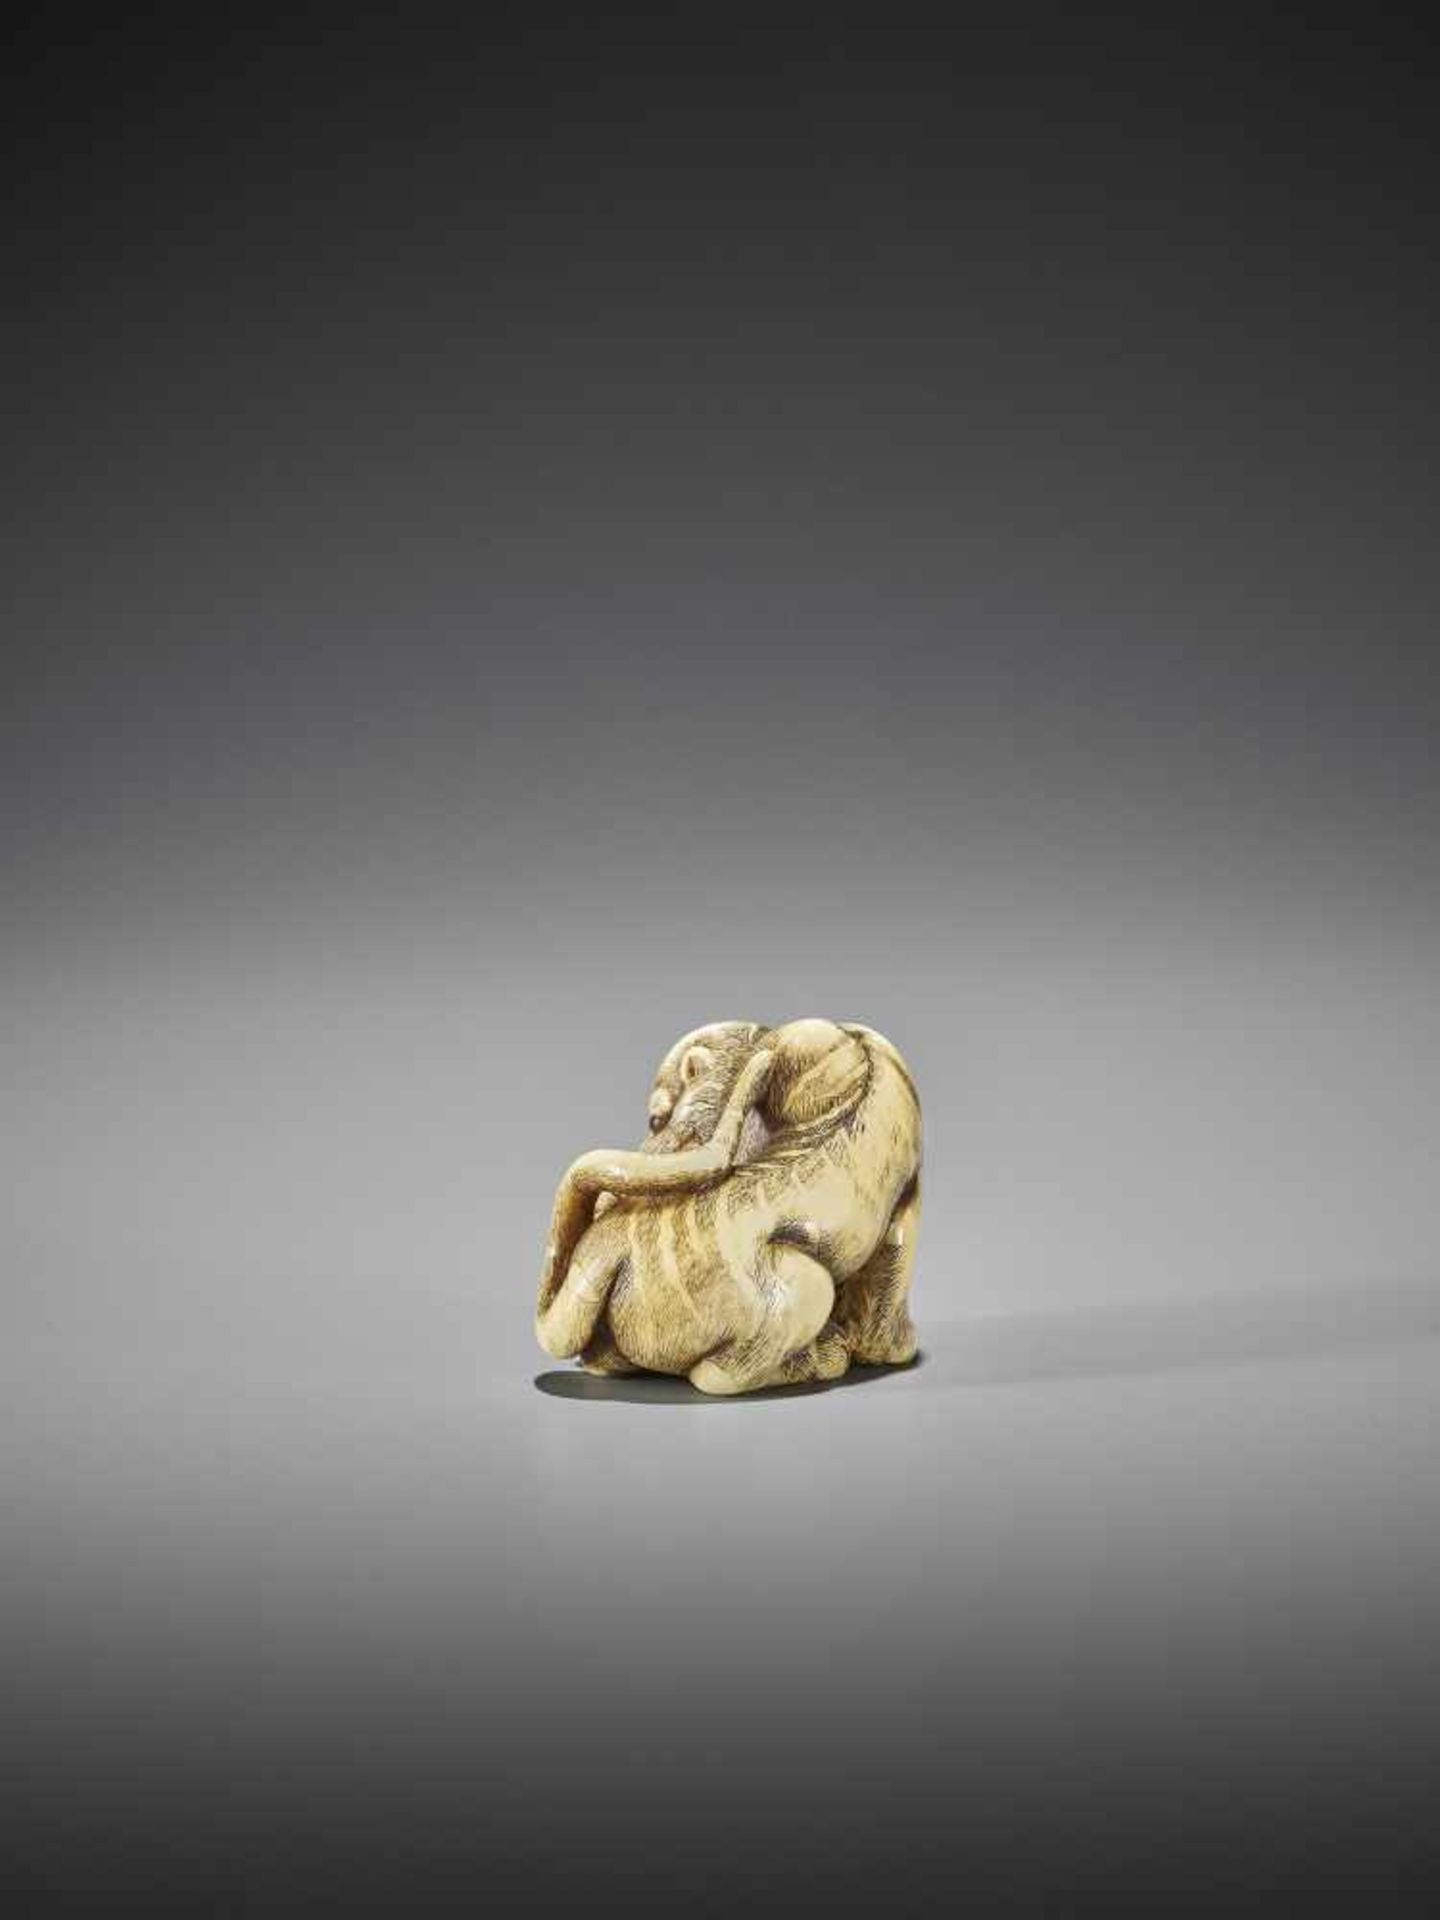 UNSHO HAKURYU I: AN EXCEPTIONAL IVORY NETSUKE OF A TIGER WITH CUB - Image 3 of 10